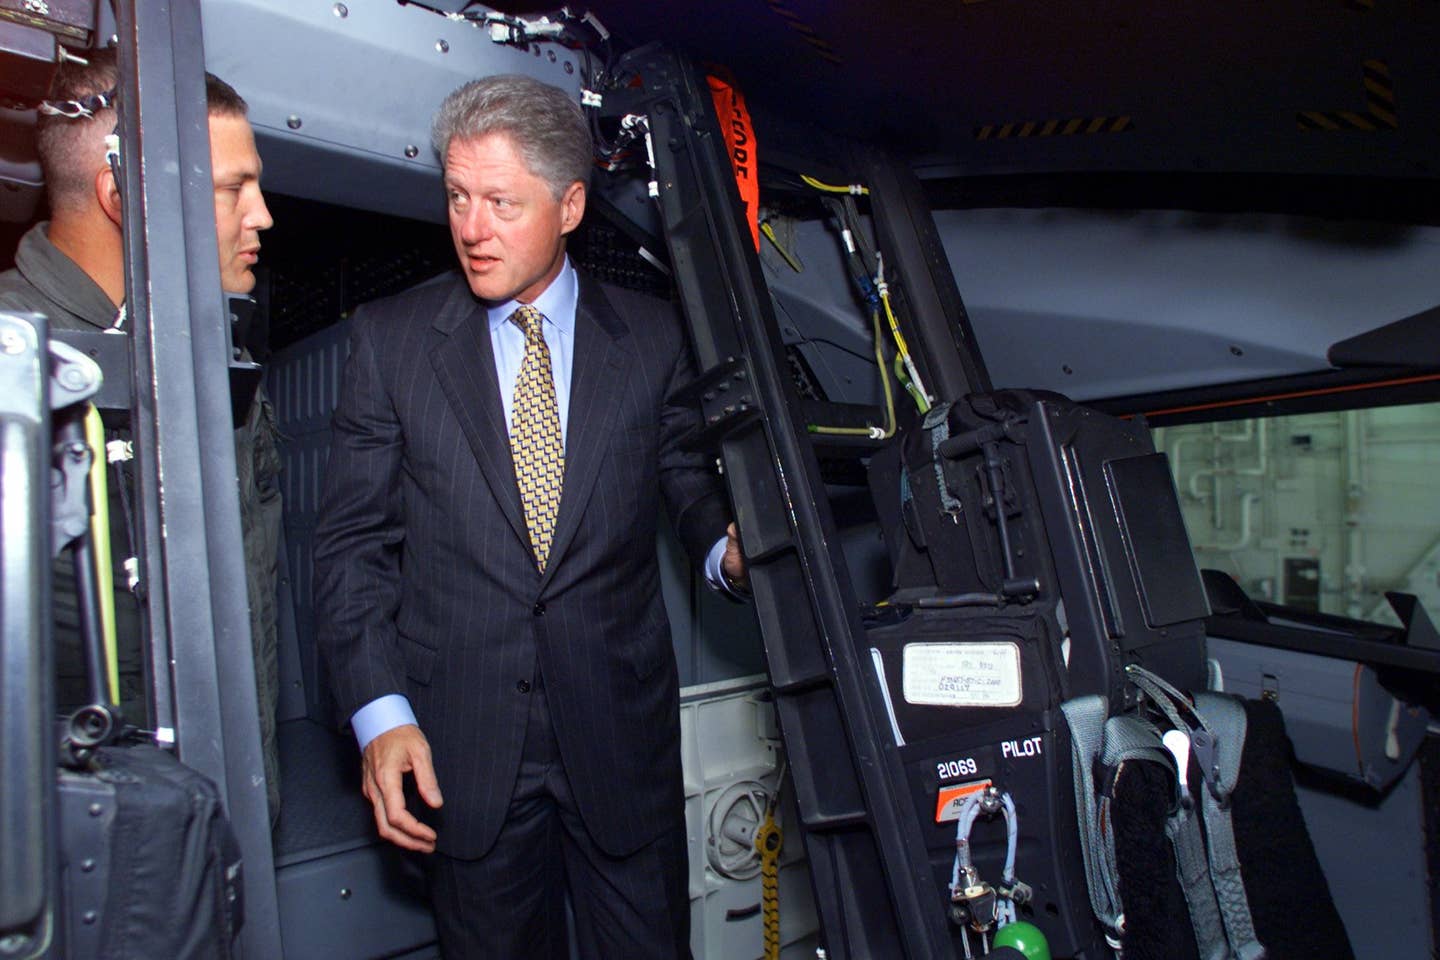 U.S. President Bill Clinton inspects the interior of a B-2 bomber during his visit to Whiteman Air Force Base in June 1999. Clinton visited the base to thank the stealth bomber crews for their efforts during Operation Allied Force. <em>AFP/AFP via Getty Images</em>